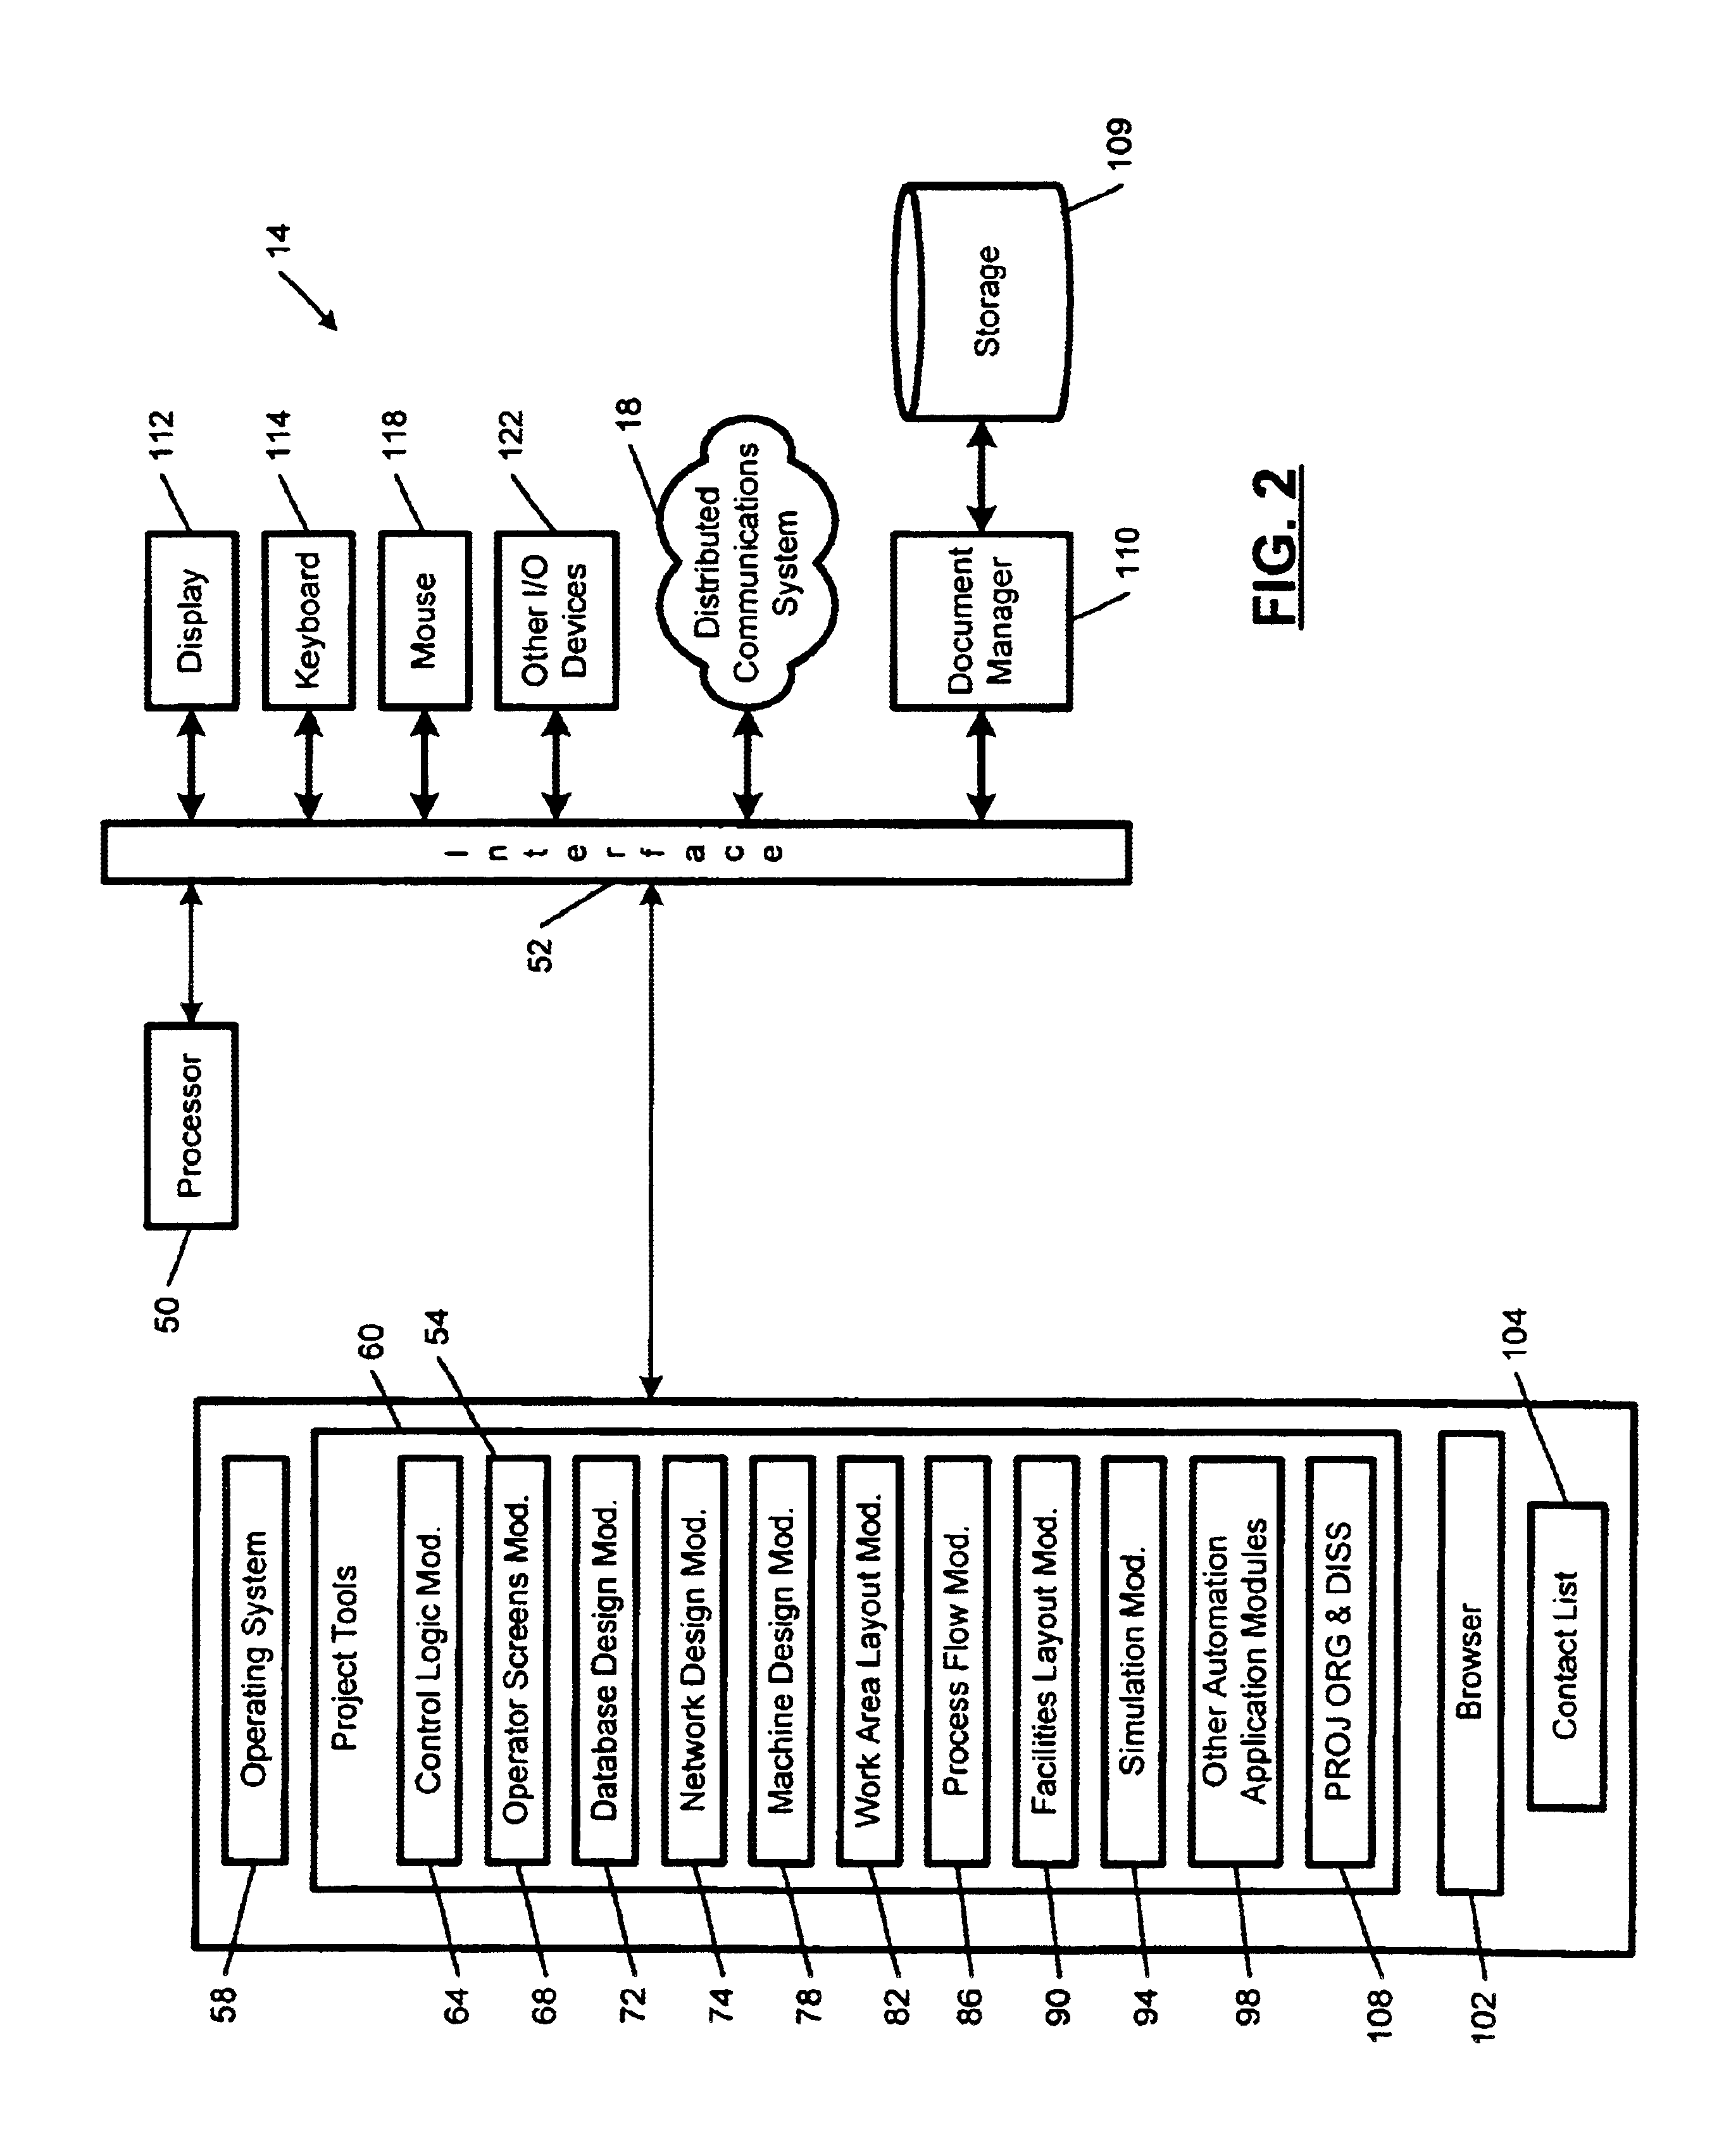 Project organization and dissemination system for machine programming and control systems